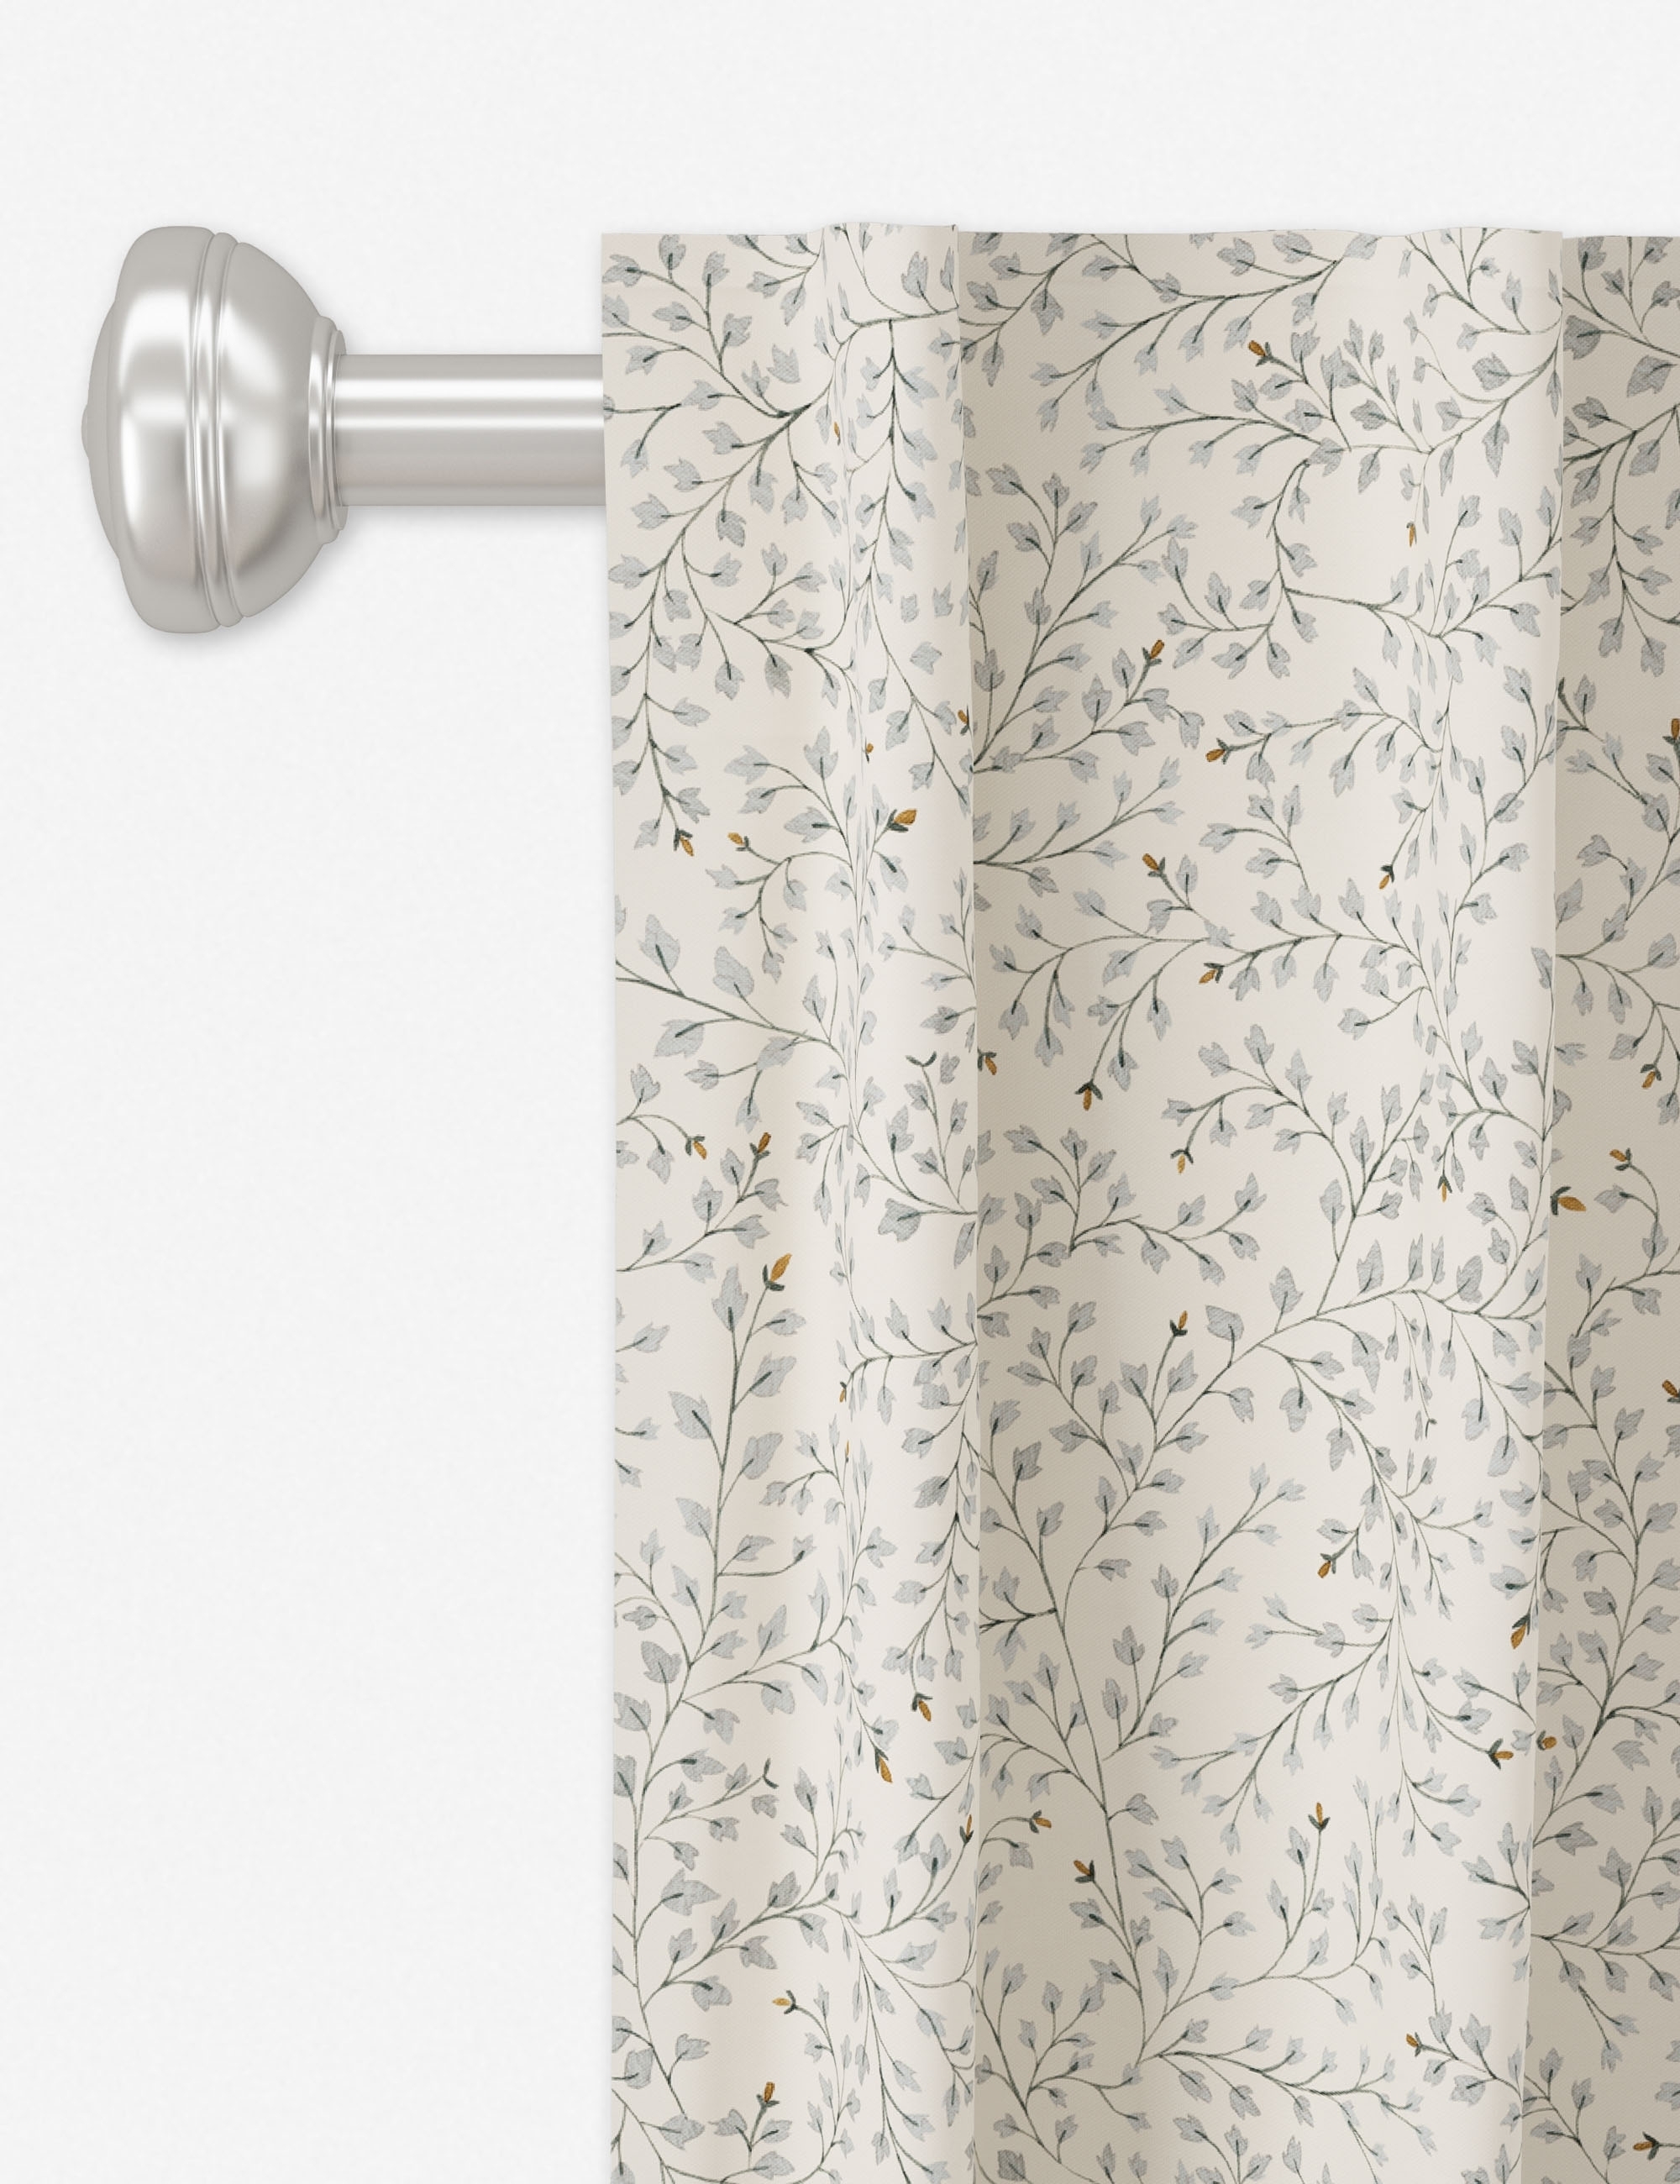 Rylee +Cru Curtain Panel, Dainty Leaves, 96" x 50" Unlined - Image 0